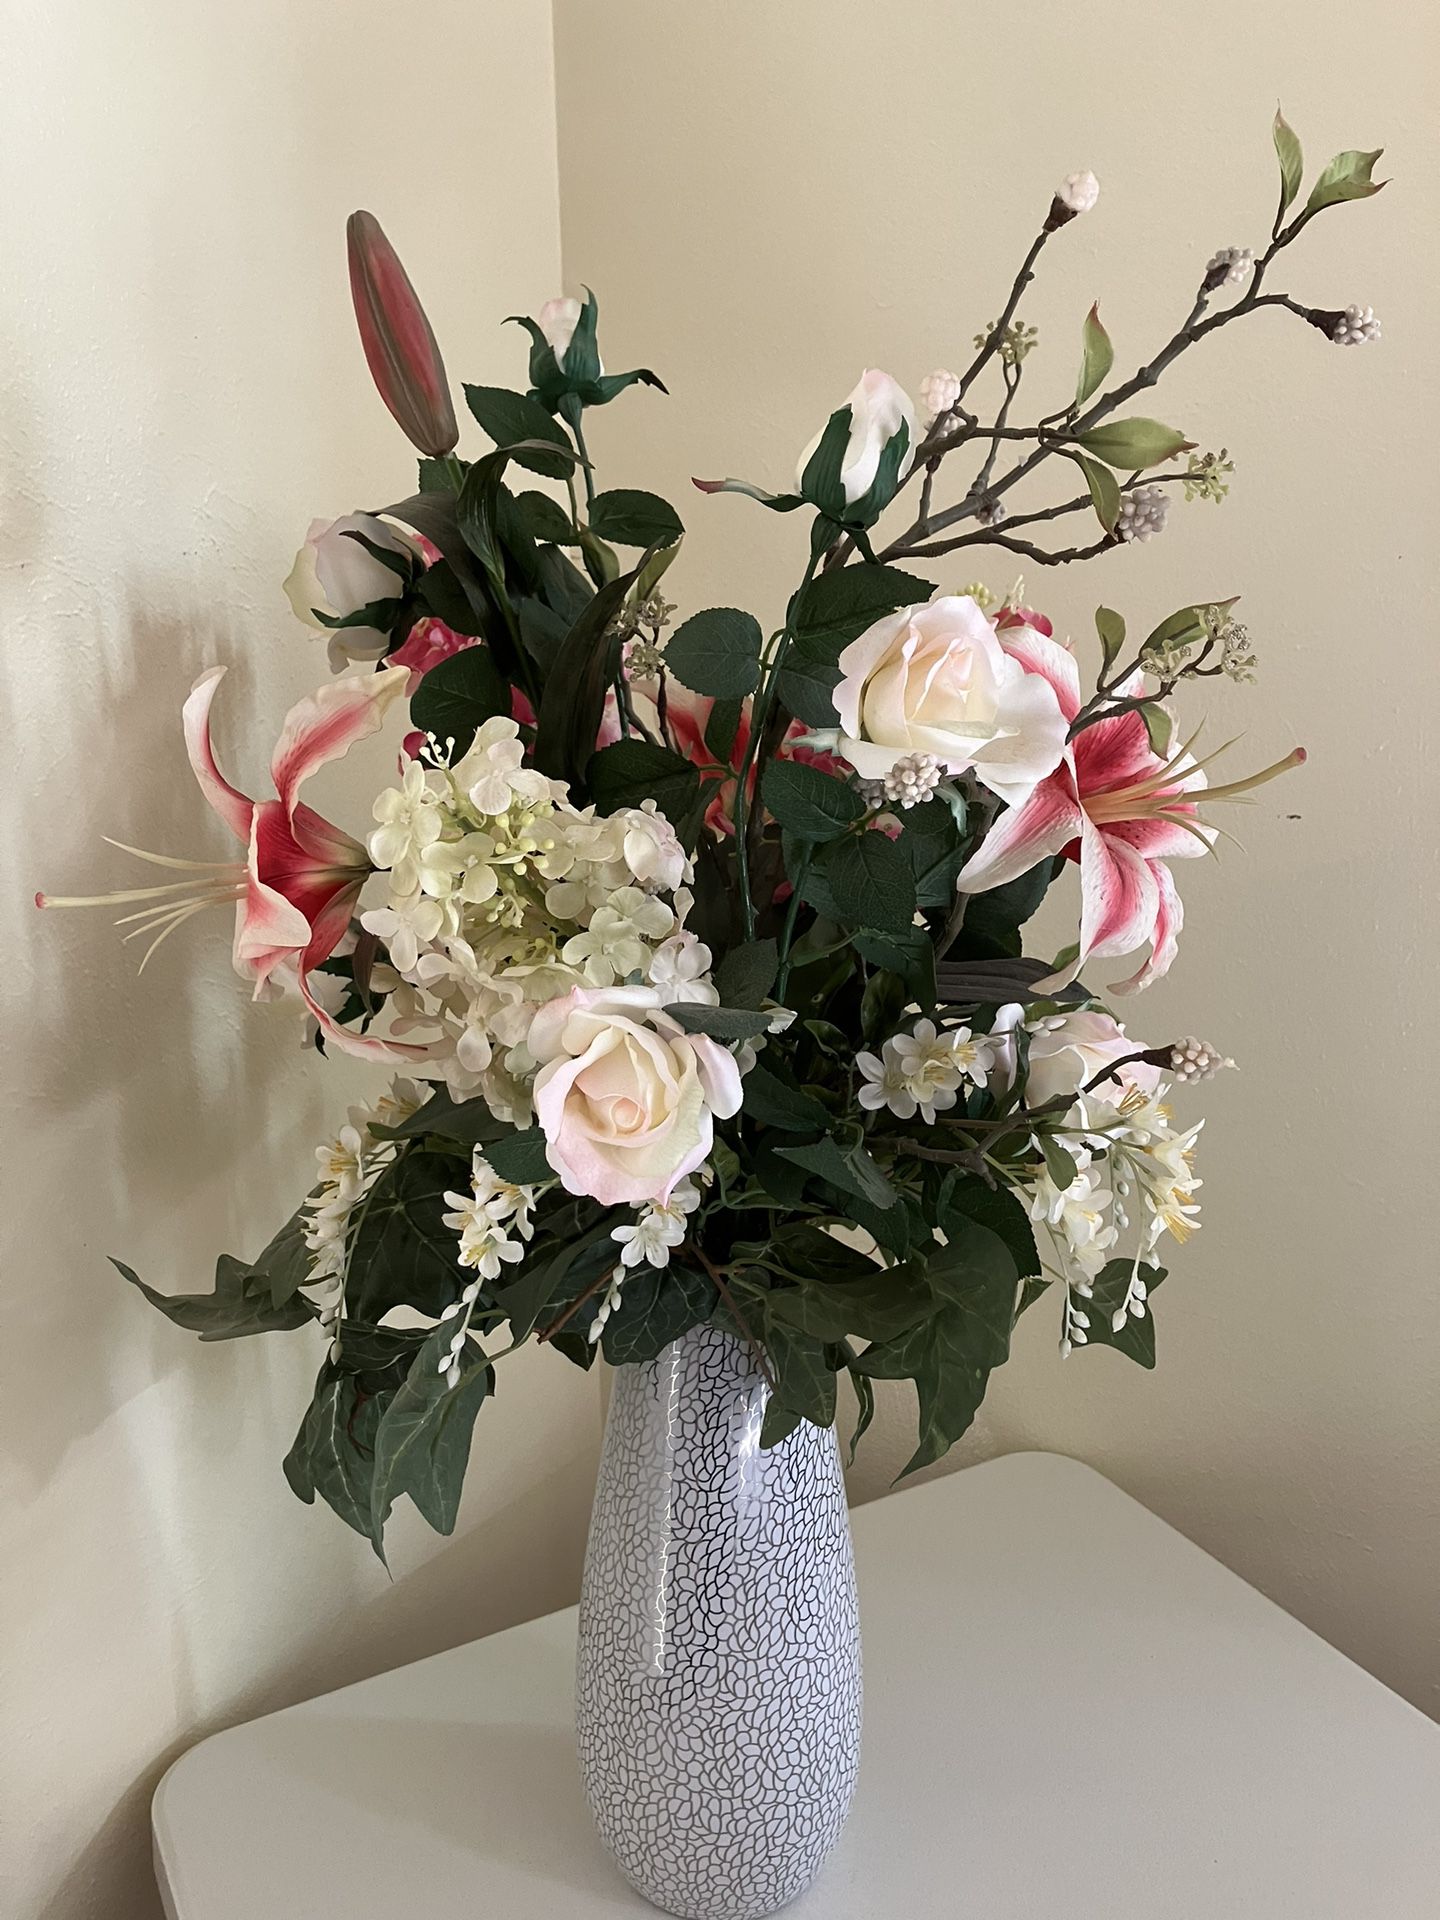 Faux Flowers & Vase: Pink Roses, Lilies [or Get 3 For $5]